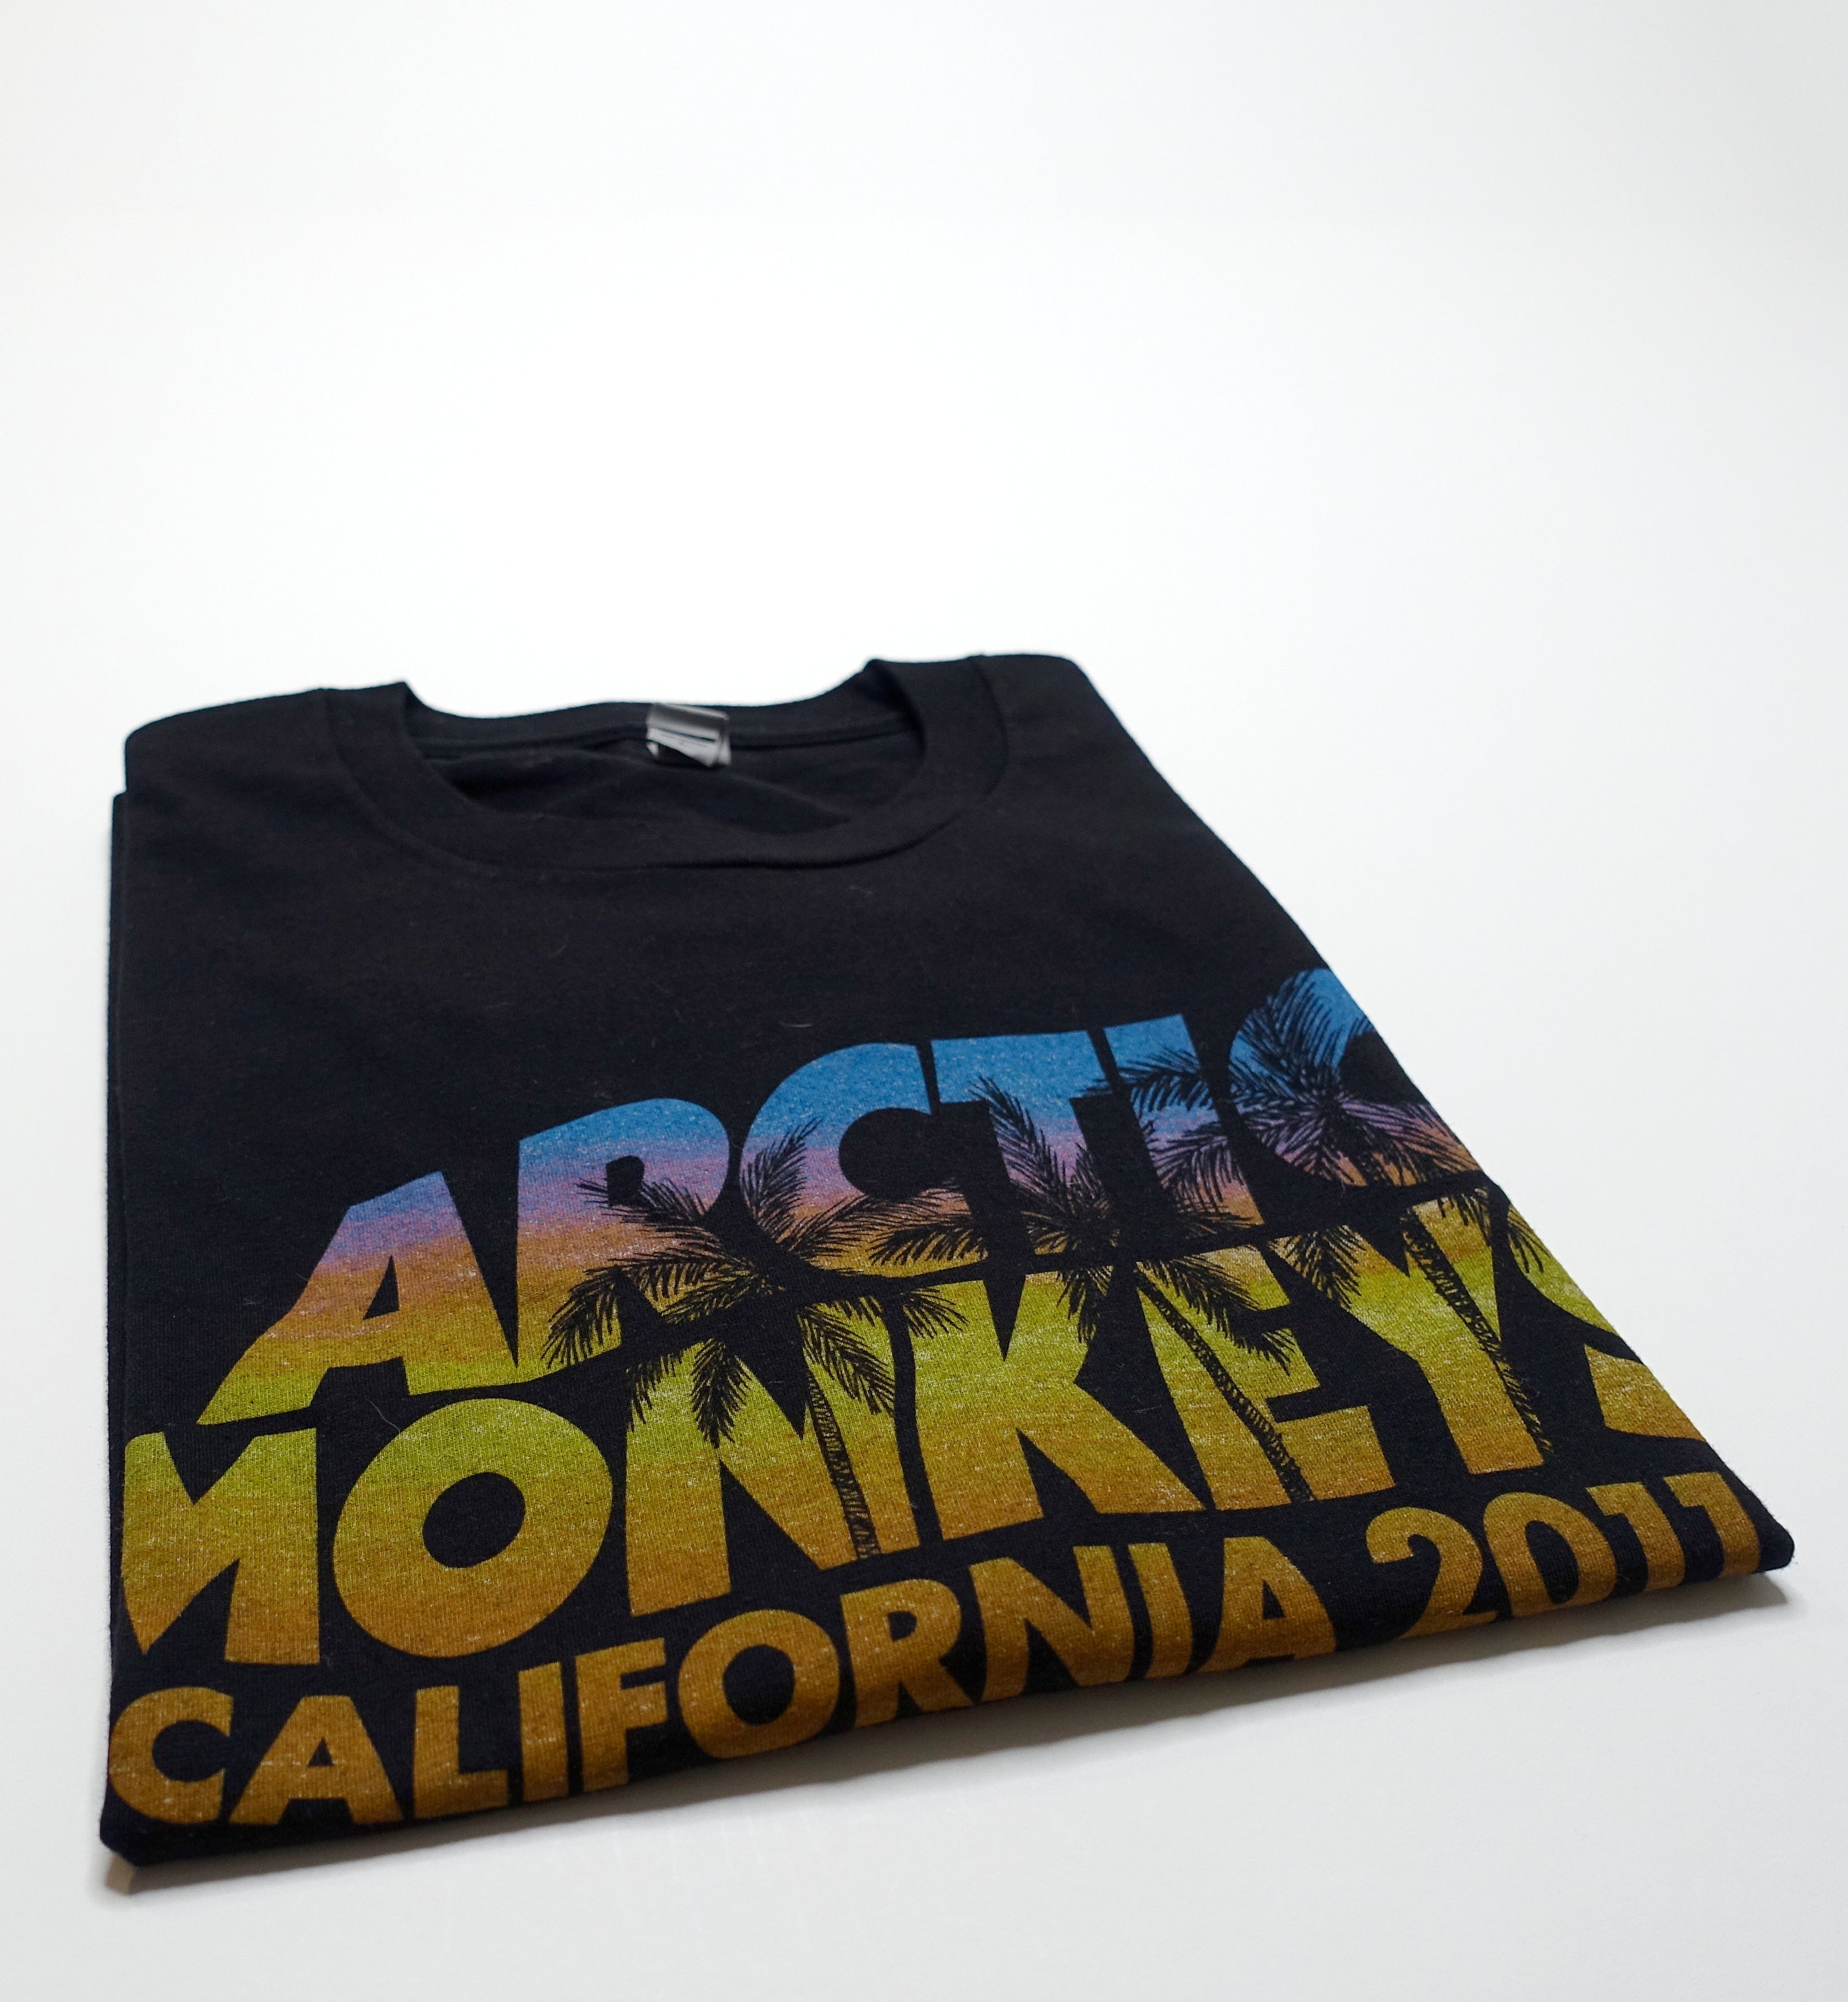 Arctic Monkeys - California 2011 / Suck It And See Tour Shirt Size Large